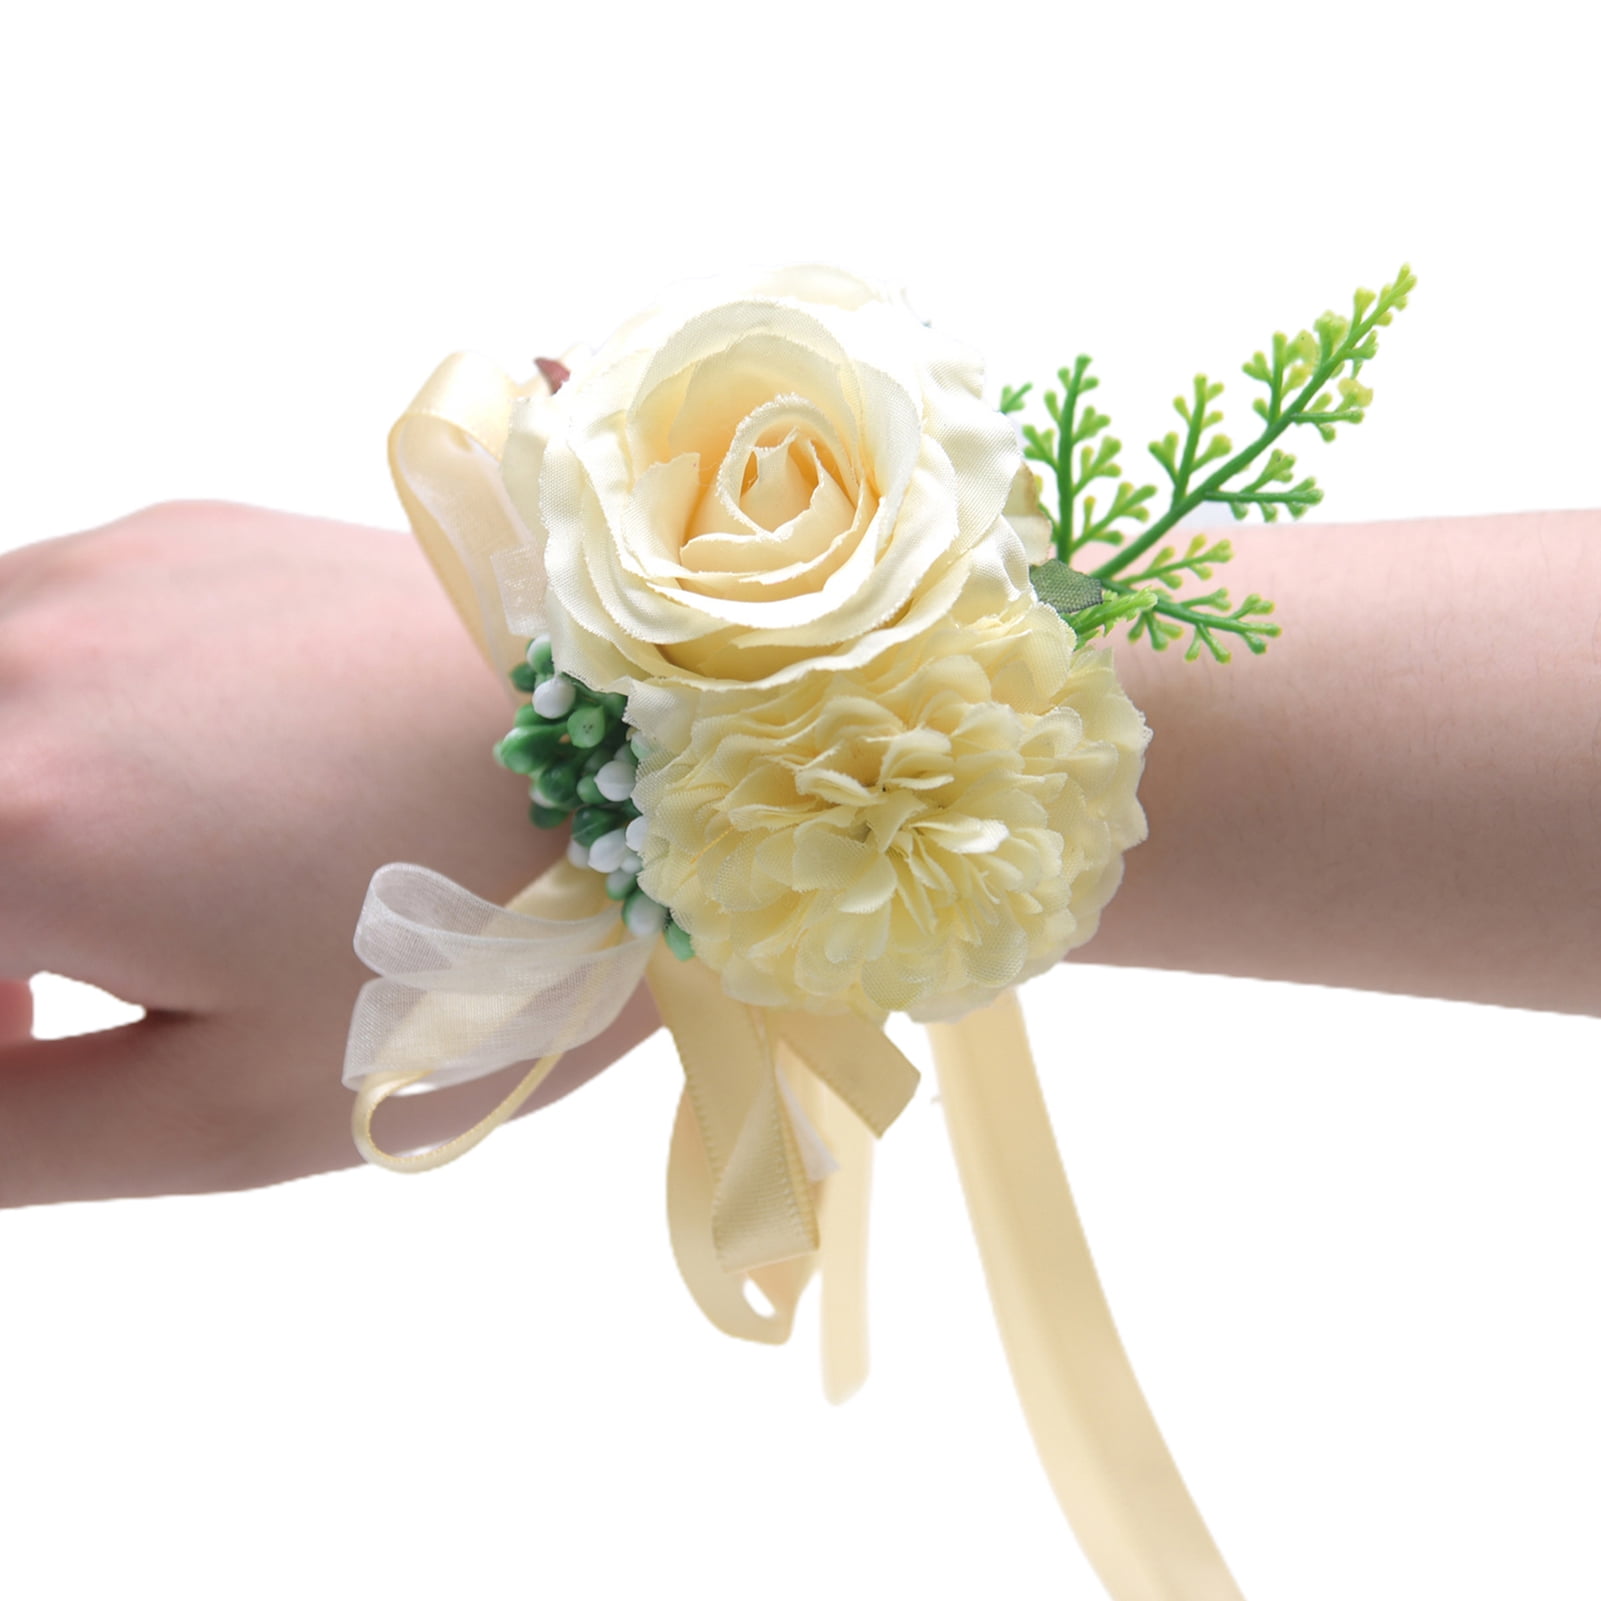  Topyond Wrist Corsages for Wedding Bride, Wrist Flower  Decorative White Roses and Green Leaves for Prom Party, Elevating Your  Wedding or Prom Ensemble : Home & Kitchen